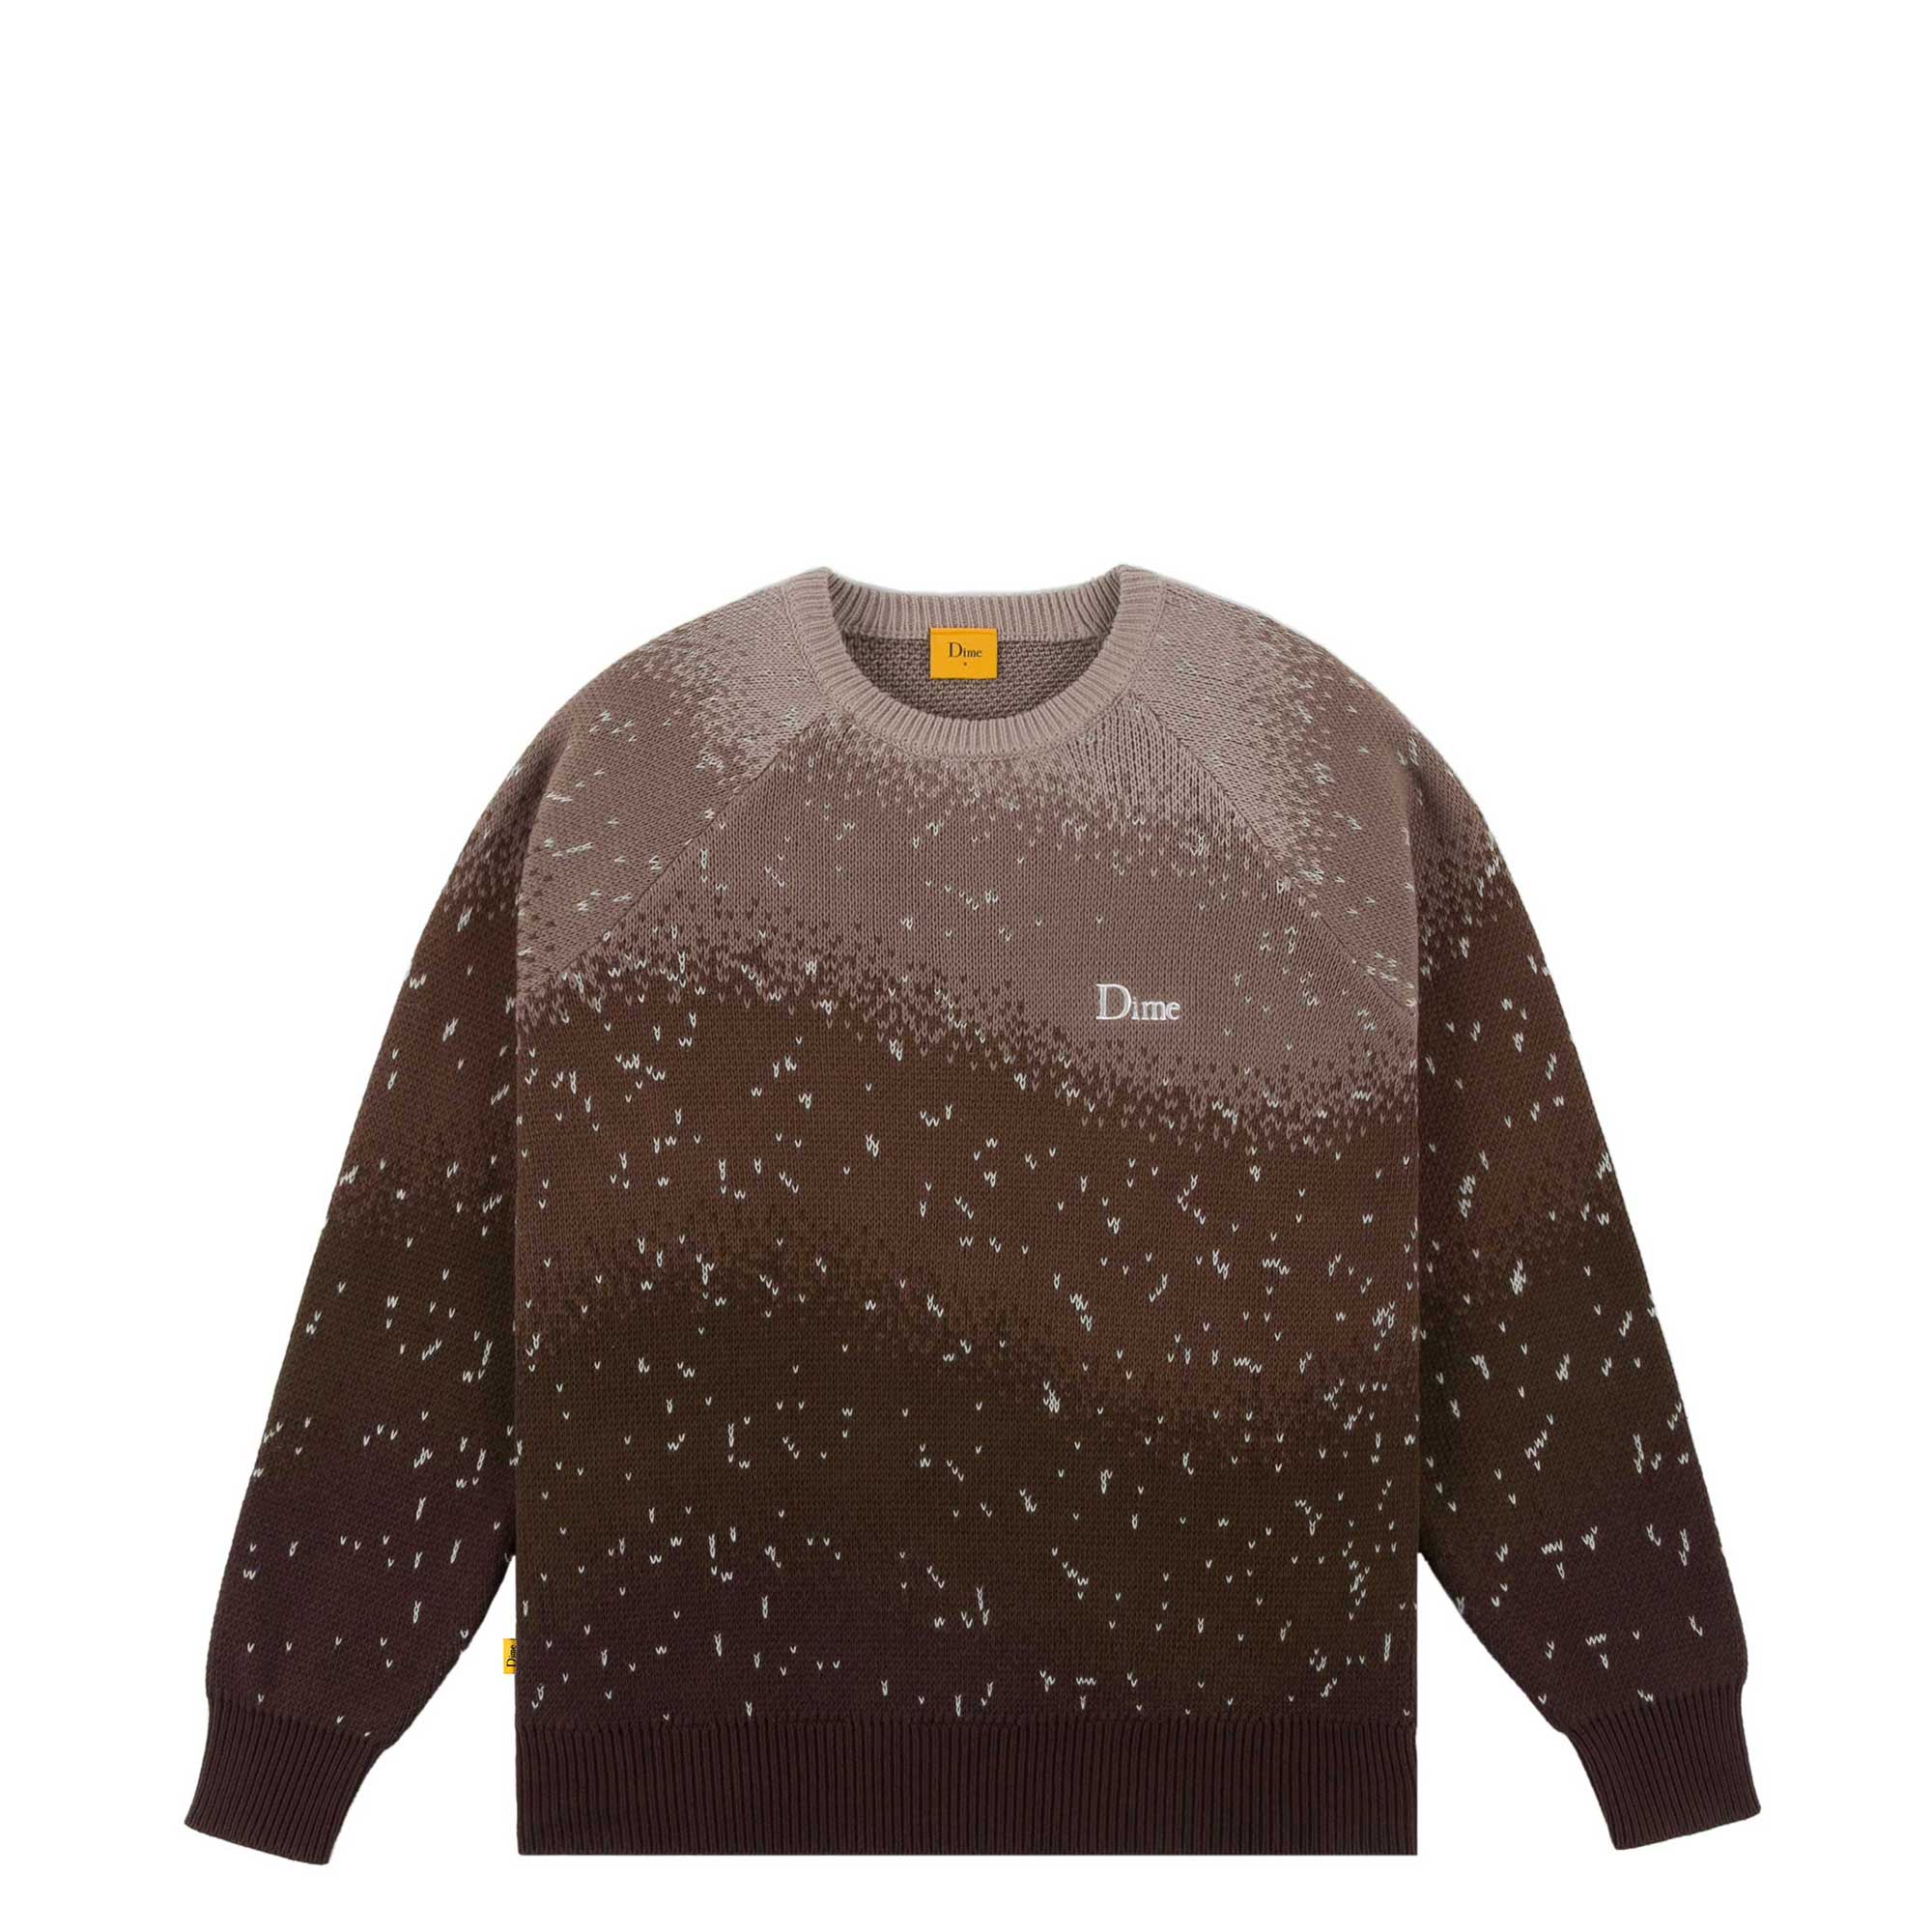 Dime Magic Heavy Knit L brown首元の緩みはありますでしょうか